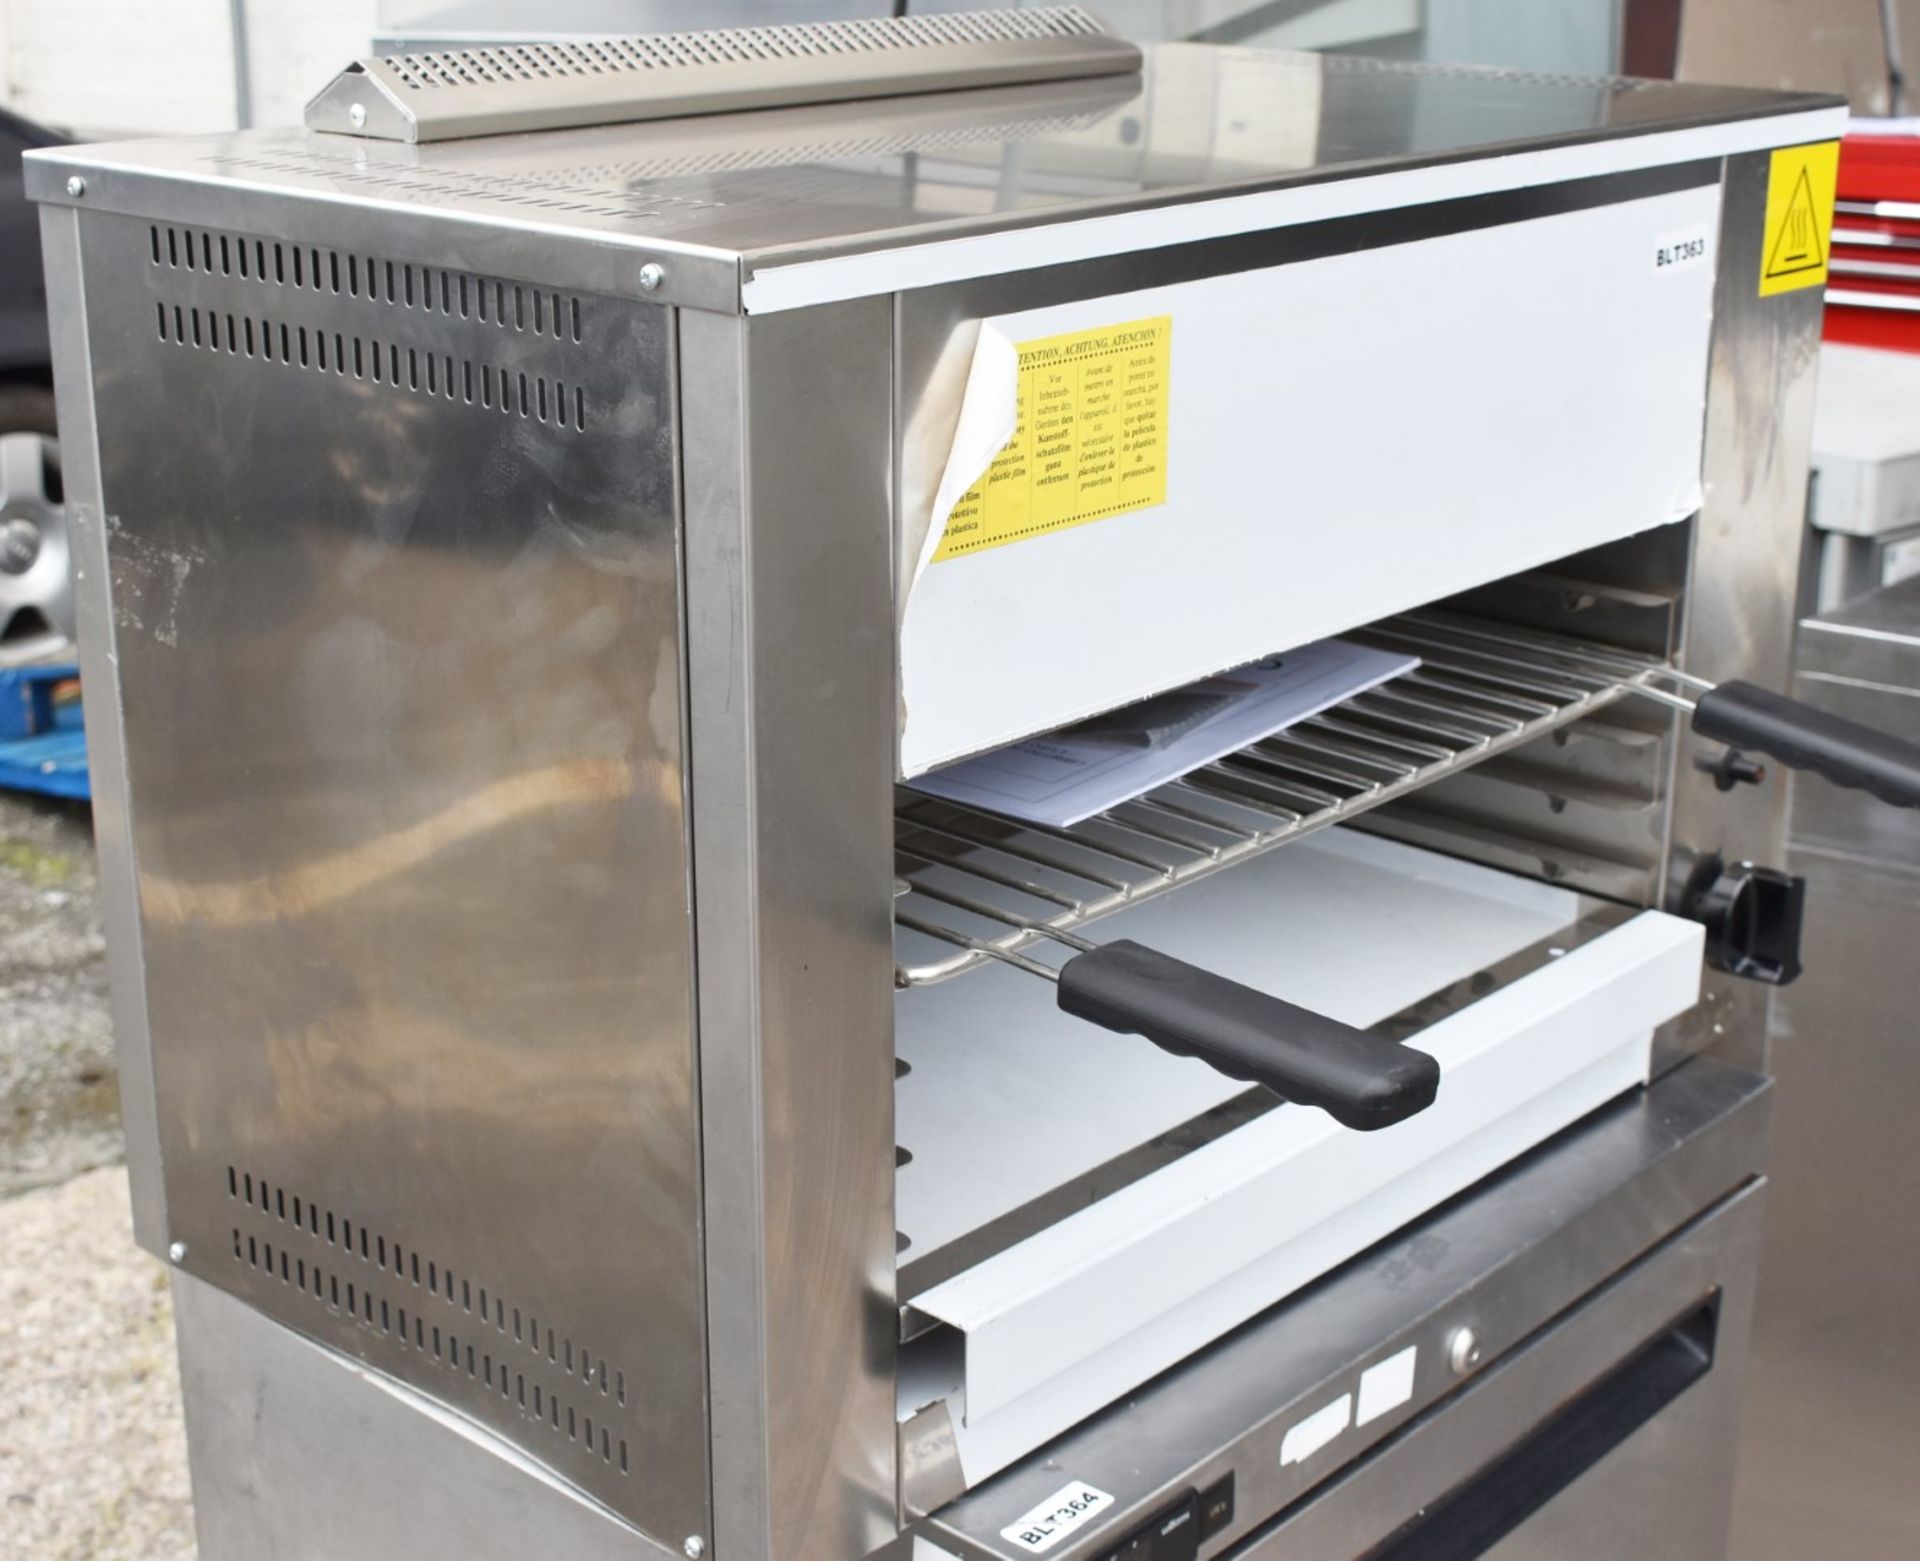 1 x Baron Stainless Steel Commercial Salamander Grill - Gas Powered - H53 x W76 x D43 cms - Model - Image 4 of 7